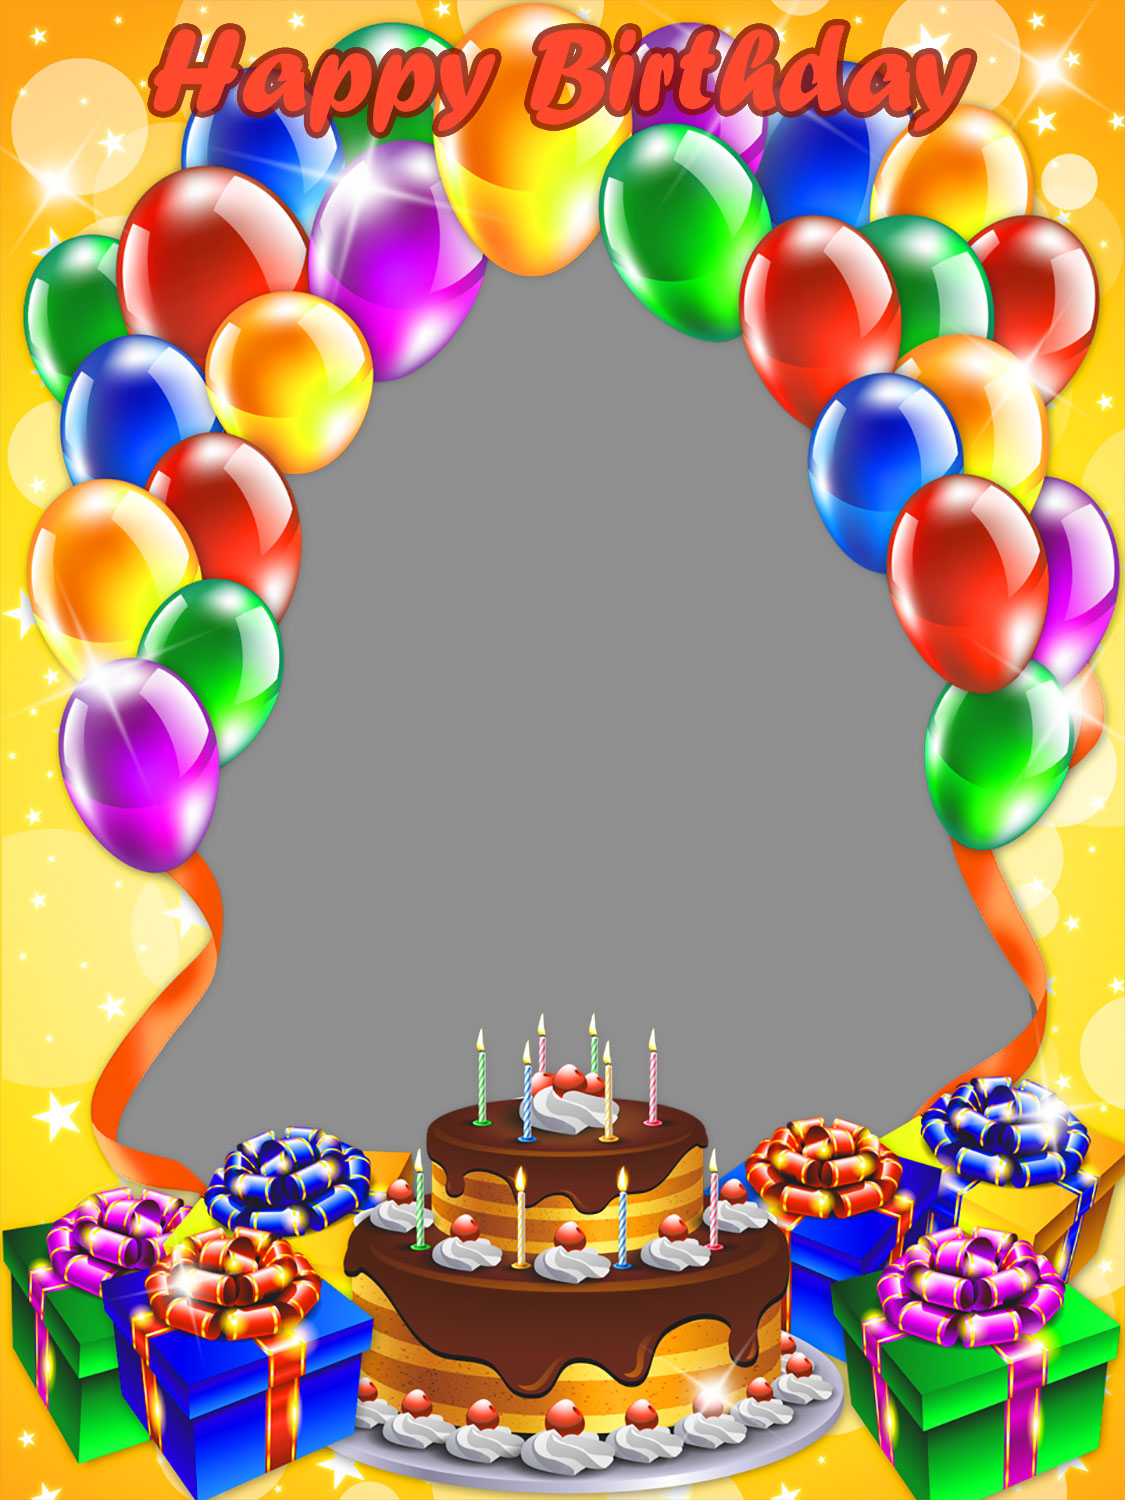 Birthday Cake With Balloons - Transparent Background Free Birthday Clip Art - HD Wallpaper 